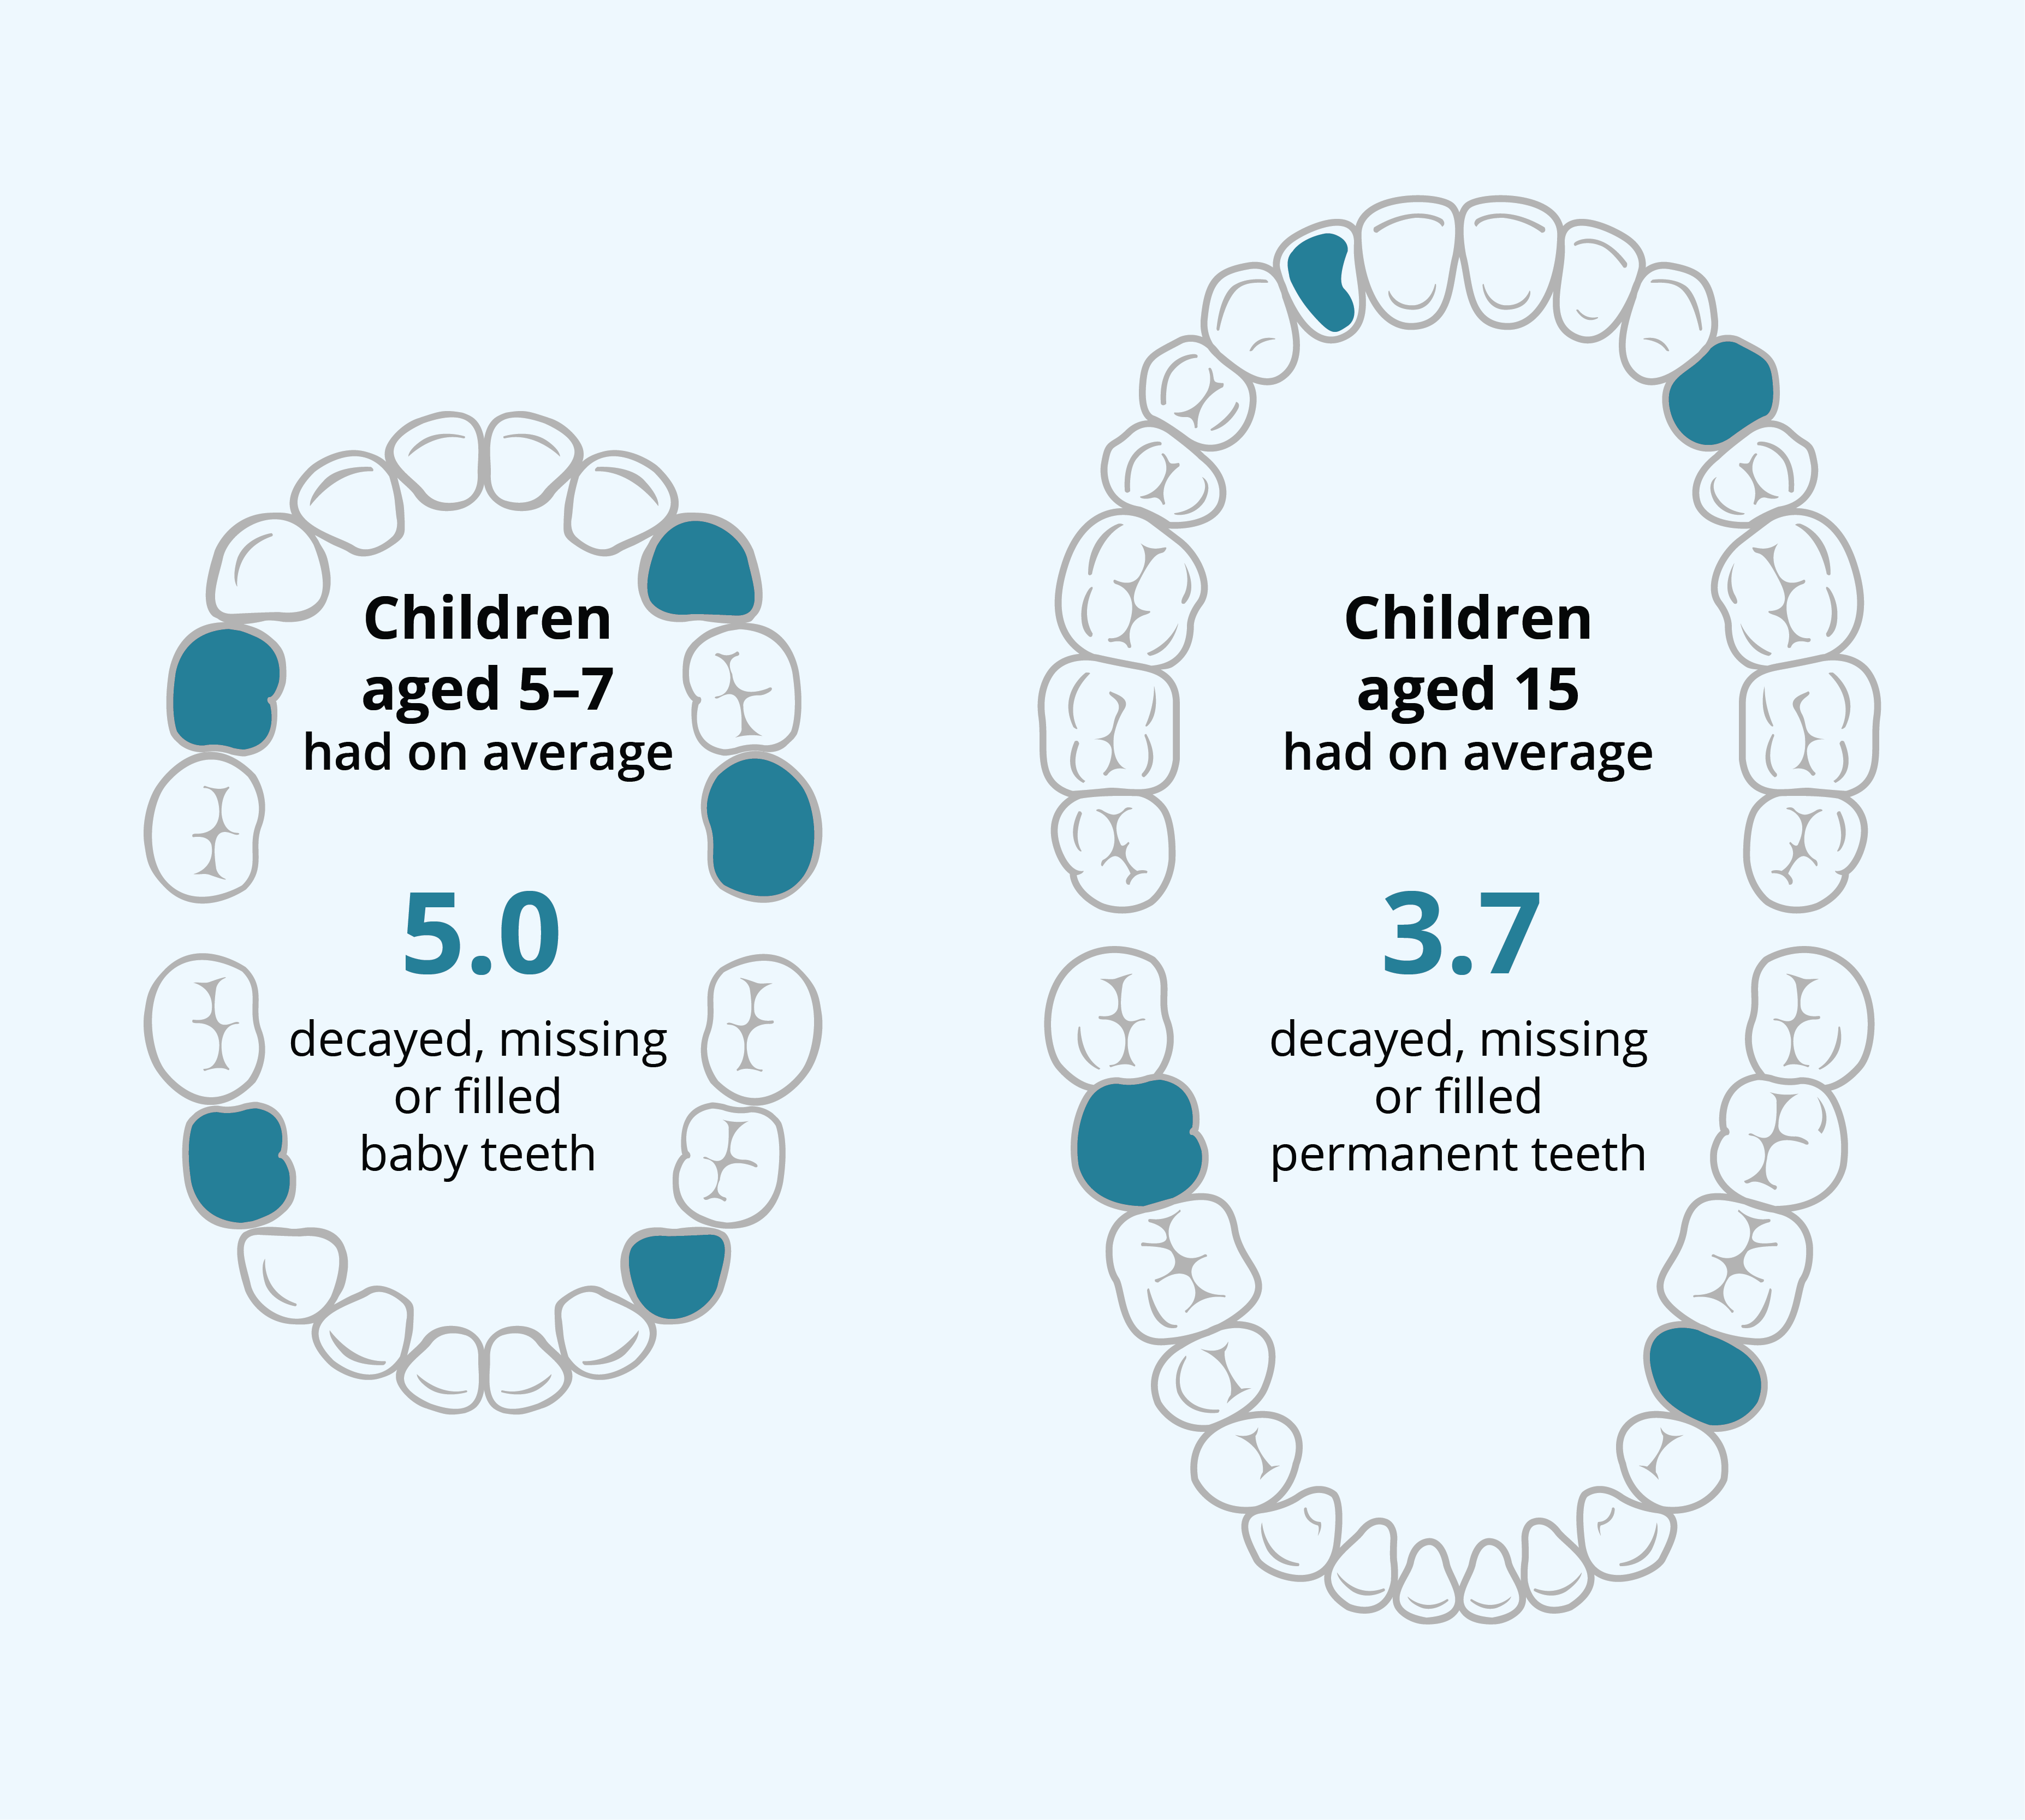 The infographic shows that First Nations children aged 5–7 in the NTRAI OHP had on average 5 decayed, missing or filled baby teeth in 2022. For those aged 15 the average was 3.7 decaying, missing, or filled permanent teeth in 2022. 